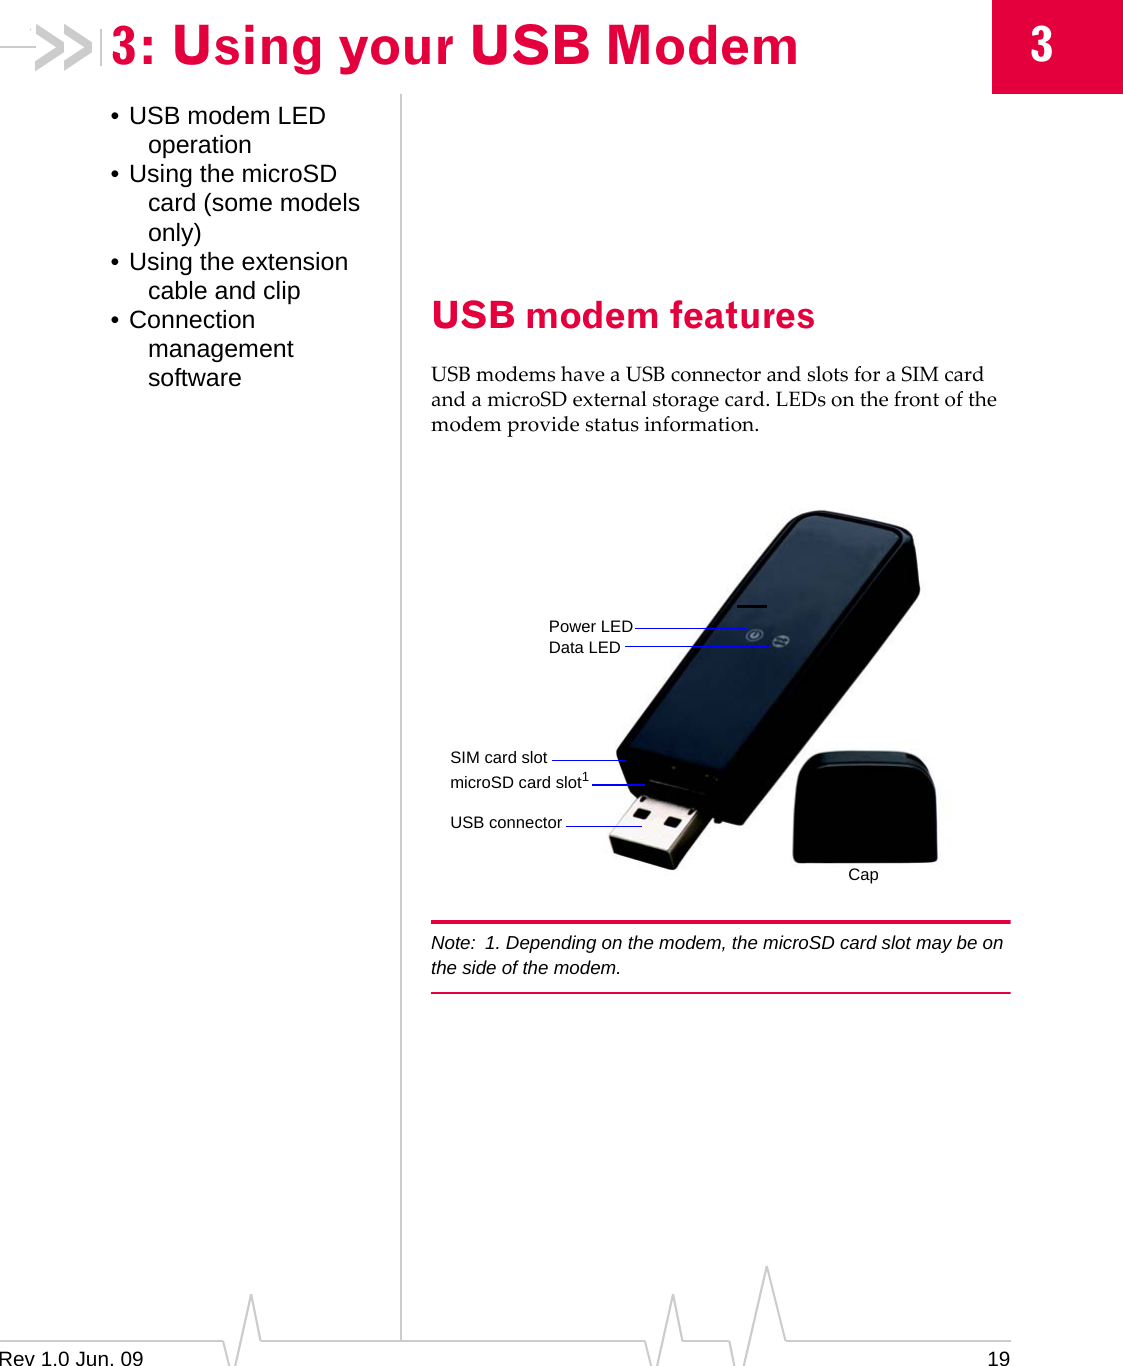 Rev 1.0 Jun. 09 1933: Using your USB Modem• USB modem LED operation• Using the microSD card (some models only)• Using the extension cable and clip• Connection management softwareUSB modem featuresUSBmodemshaveaUSBconnectorandslotsforaSIMcardandamicroSDexternalstoragecard.LEDsonthefrontofthemodemprovidestatusinformation.Note: 1. Depending on the modem, the microSD card slot may be on the side of the modem.microSD card slot1USB connectorCapSIM card slotData LEDPower LED